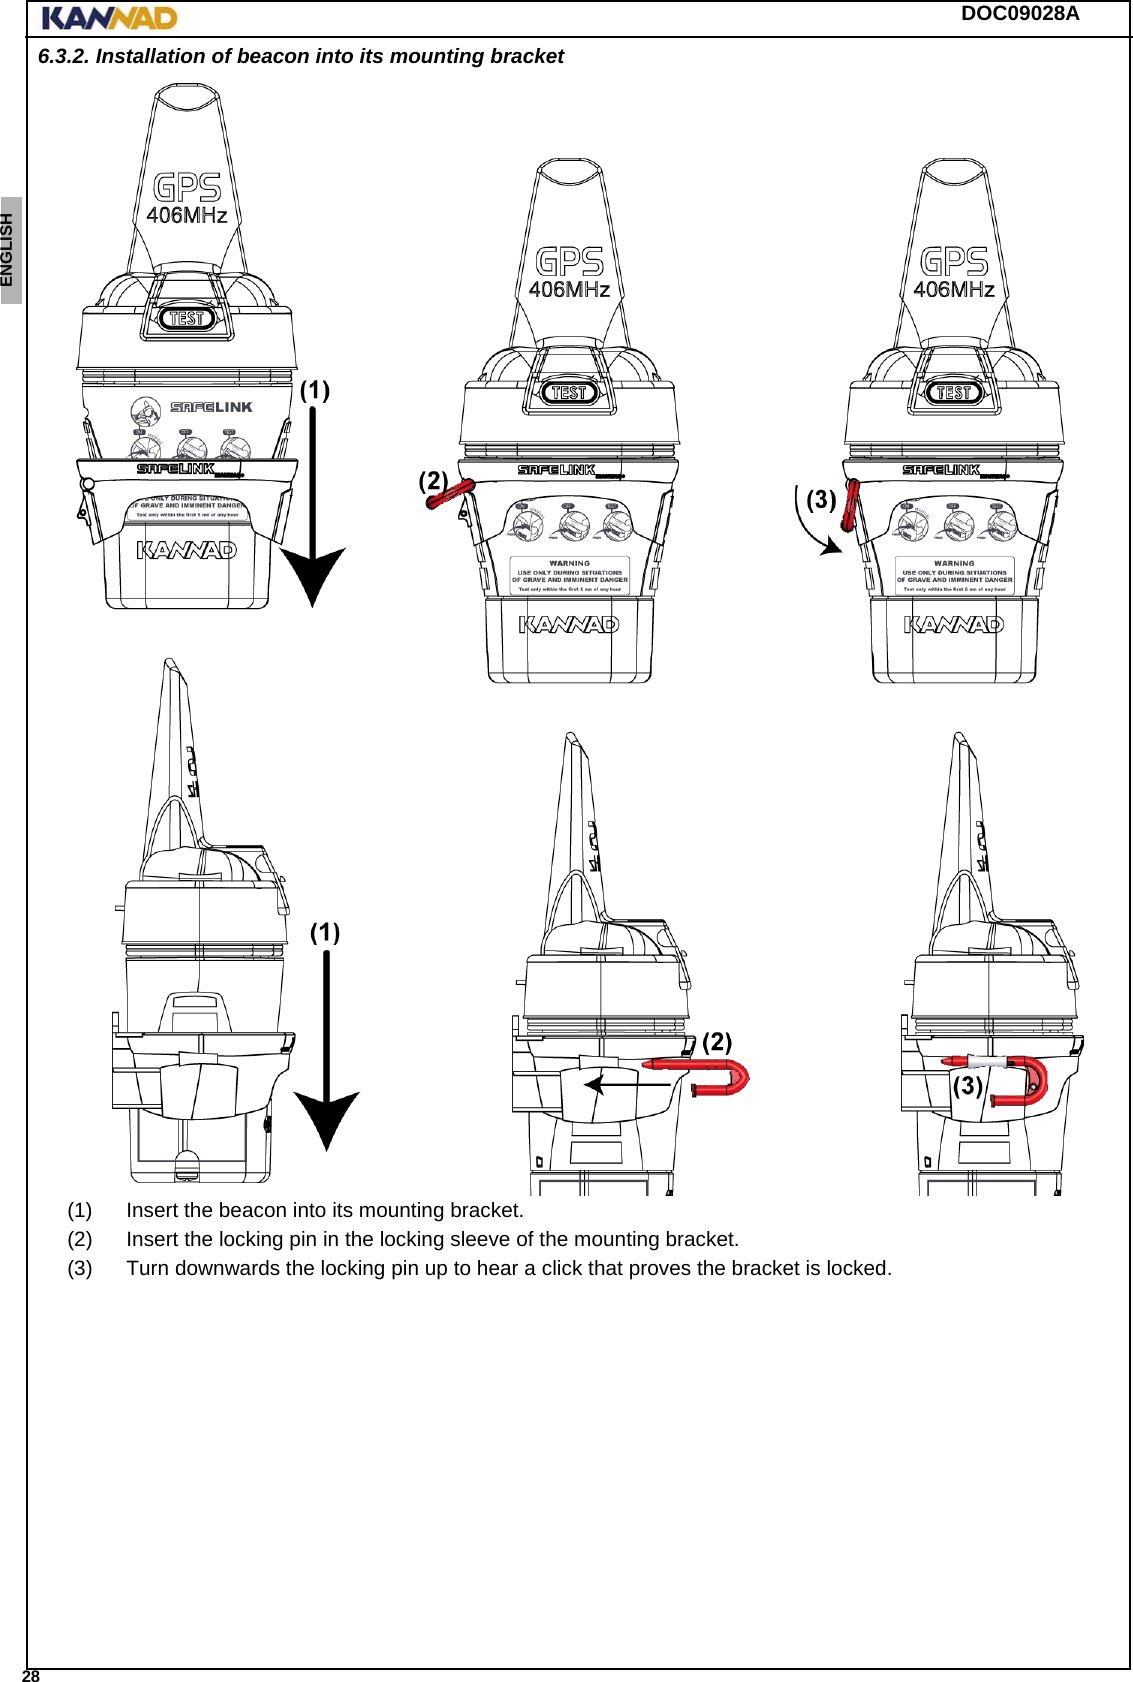 DOC09028A 28ENGLISH ESPAÑOL DEUTSCH  FRANÇAIS ITALIANO NEDERLANDS LANG7 LANG8 LANG9 LANG10 LANG11 LANG12 6.3.2. Installation of beacon into its mounting bracket(1) Insert the beacon into its mounting bracket.(2) Insert the locking pin in the locking sleeve of the mounting bracket.(3) Turn downwards the locking pin up to hear a click that proves the bracket is locked.